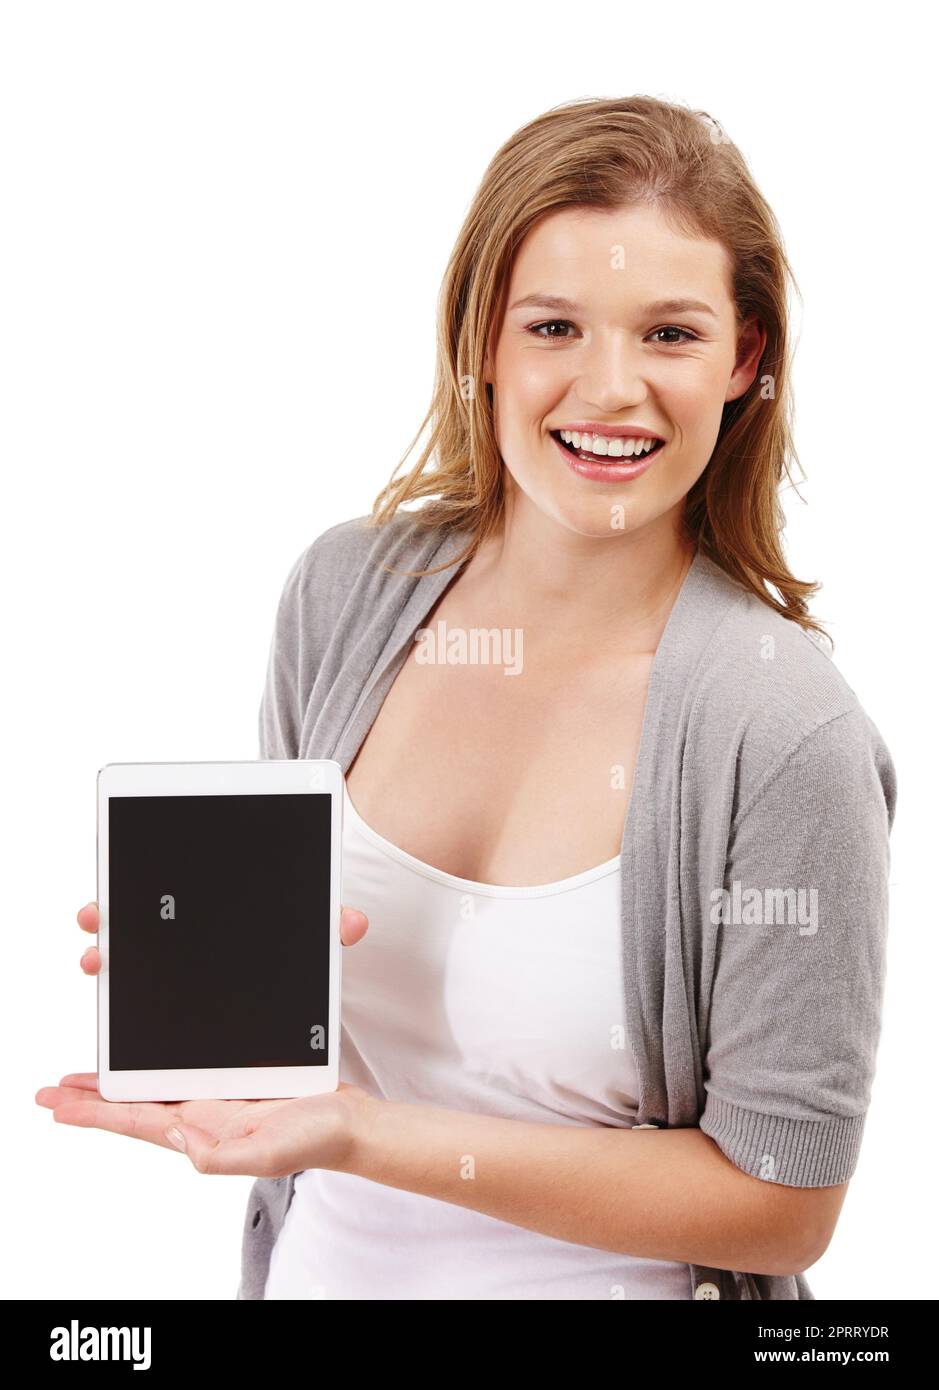 The latest in tablet technology. Studio portrait of an attractive young woman holding up a digital tablet against a white background. Stock Photo